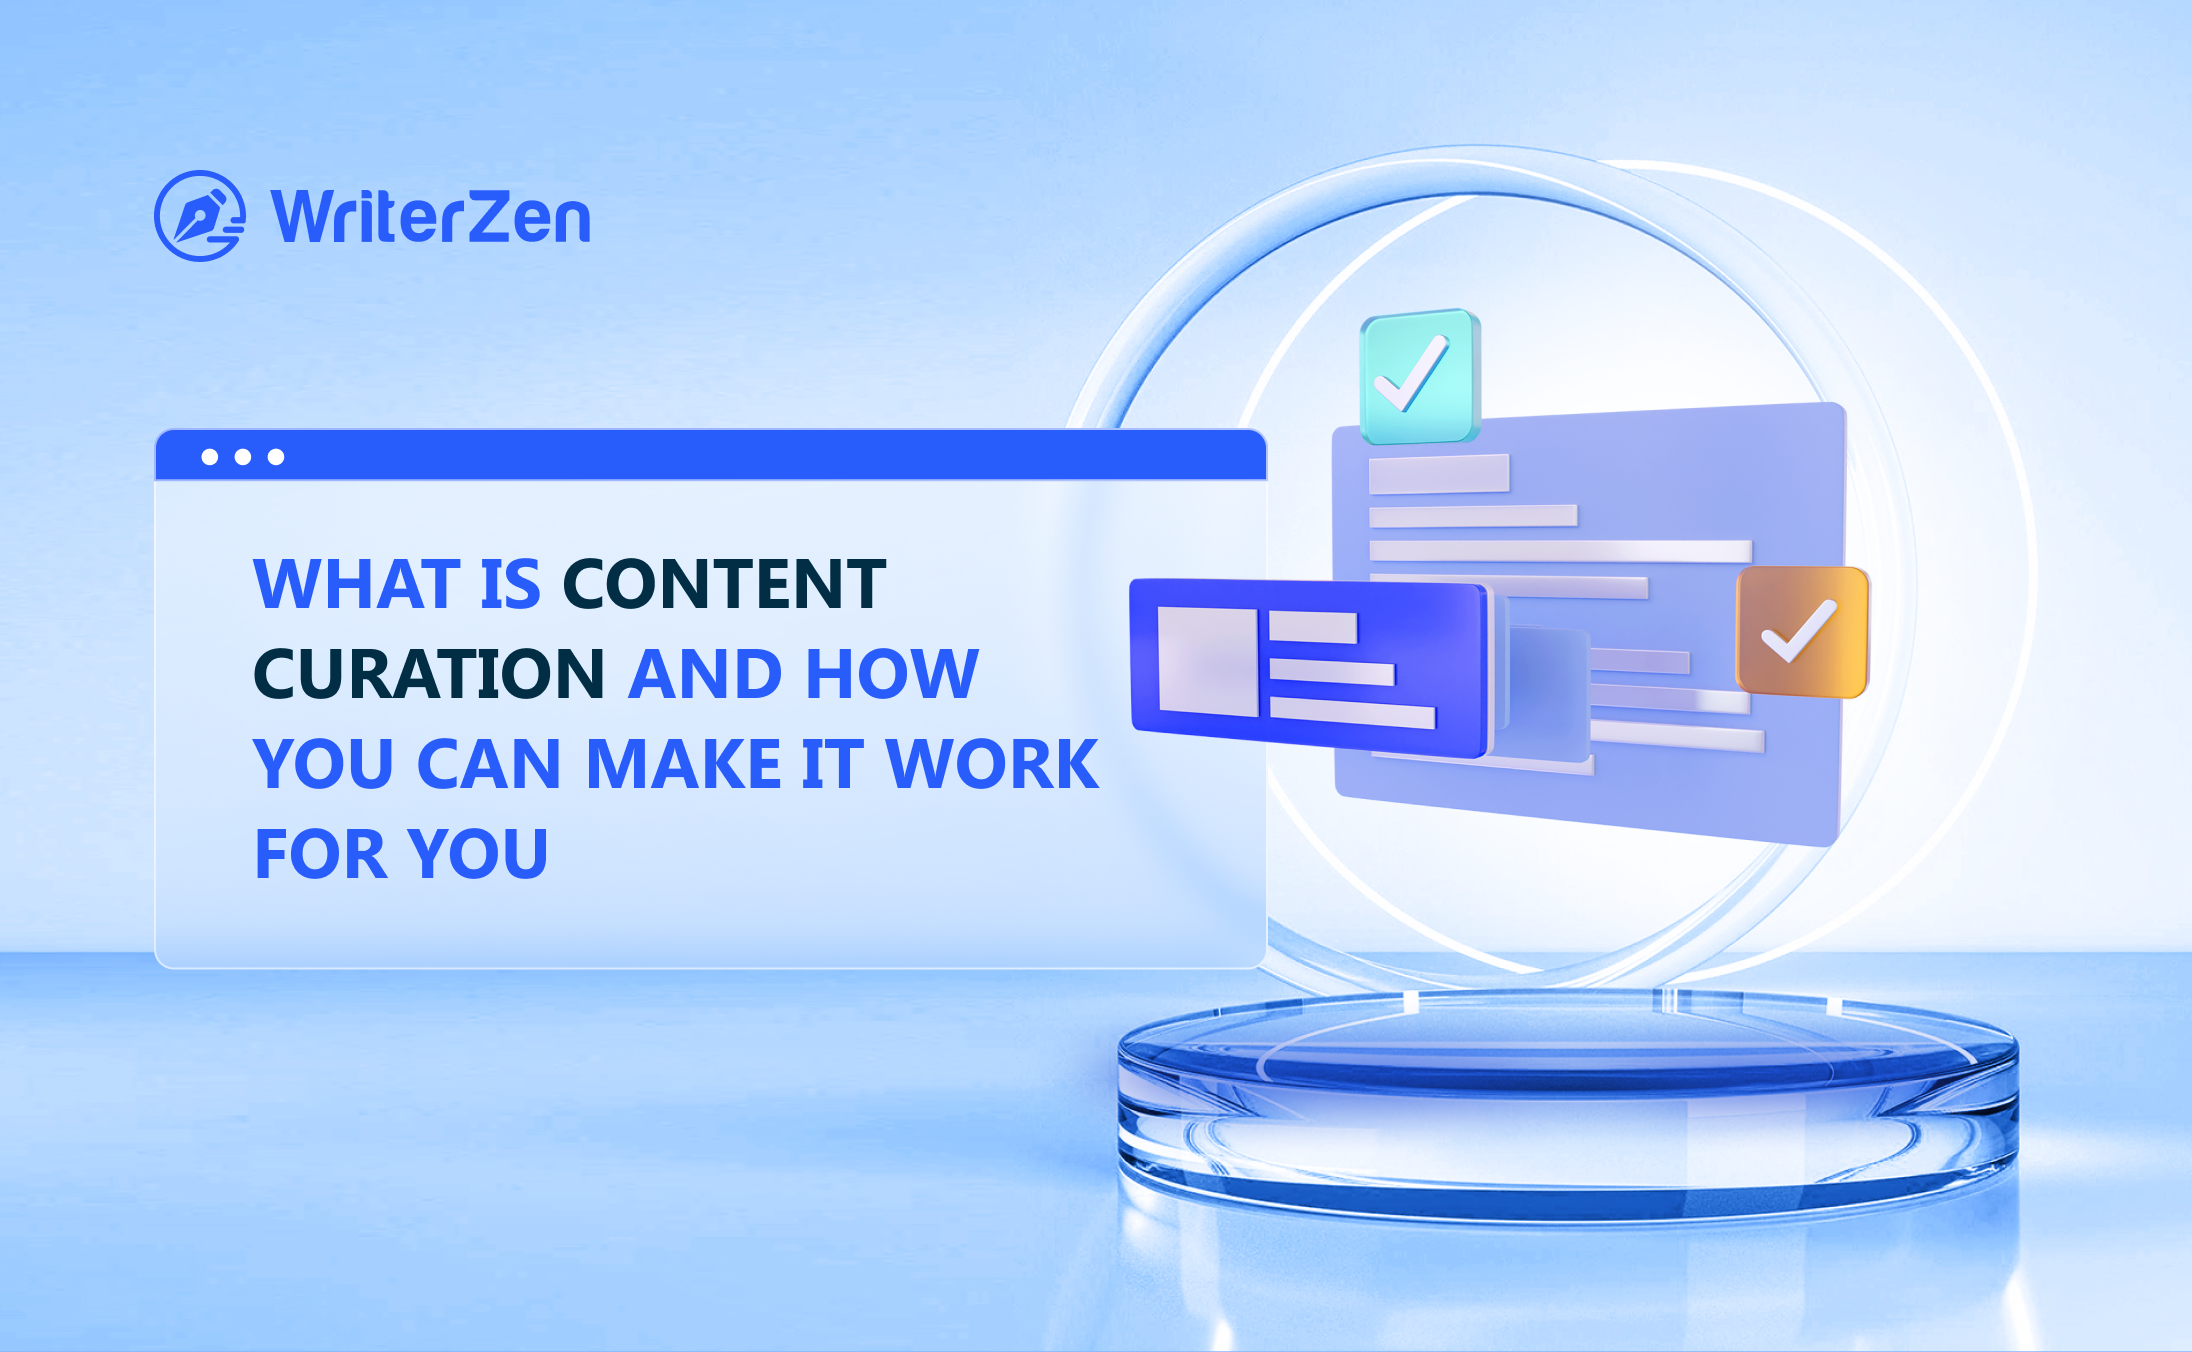 What Is Content Curation and How You Can Make It Work for You?